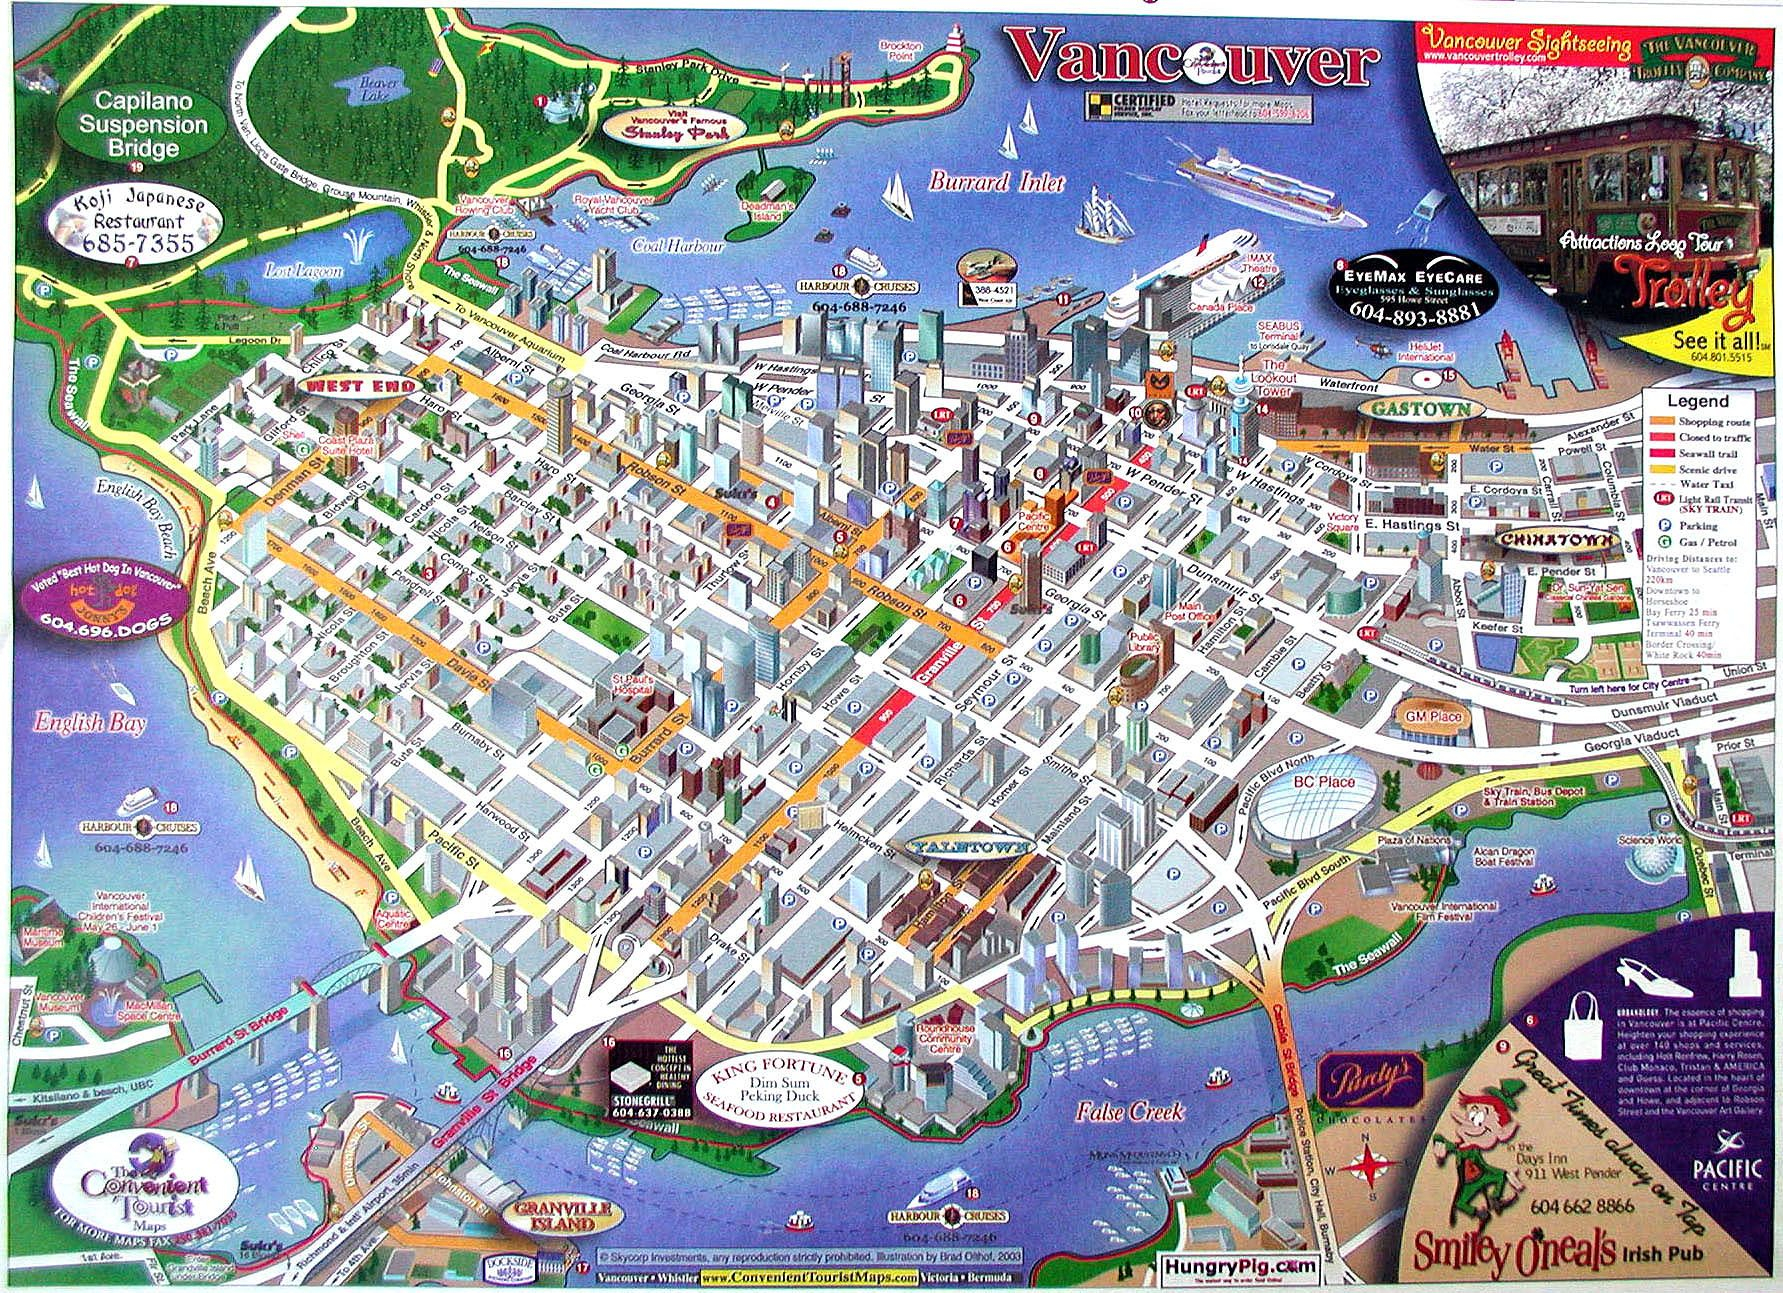 Vancouver Downtown Map Vancouver BC Vancouver Map 